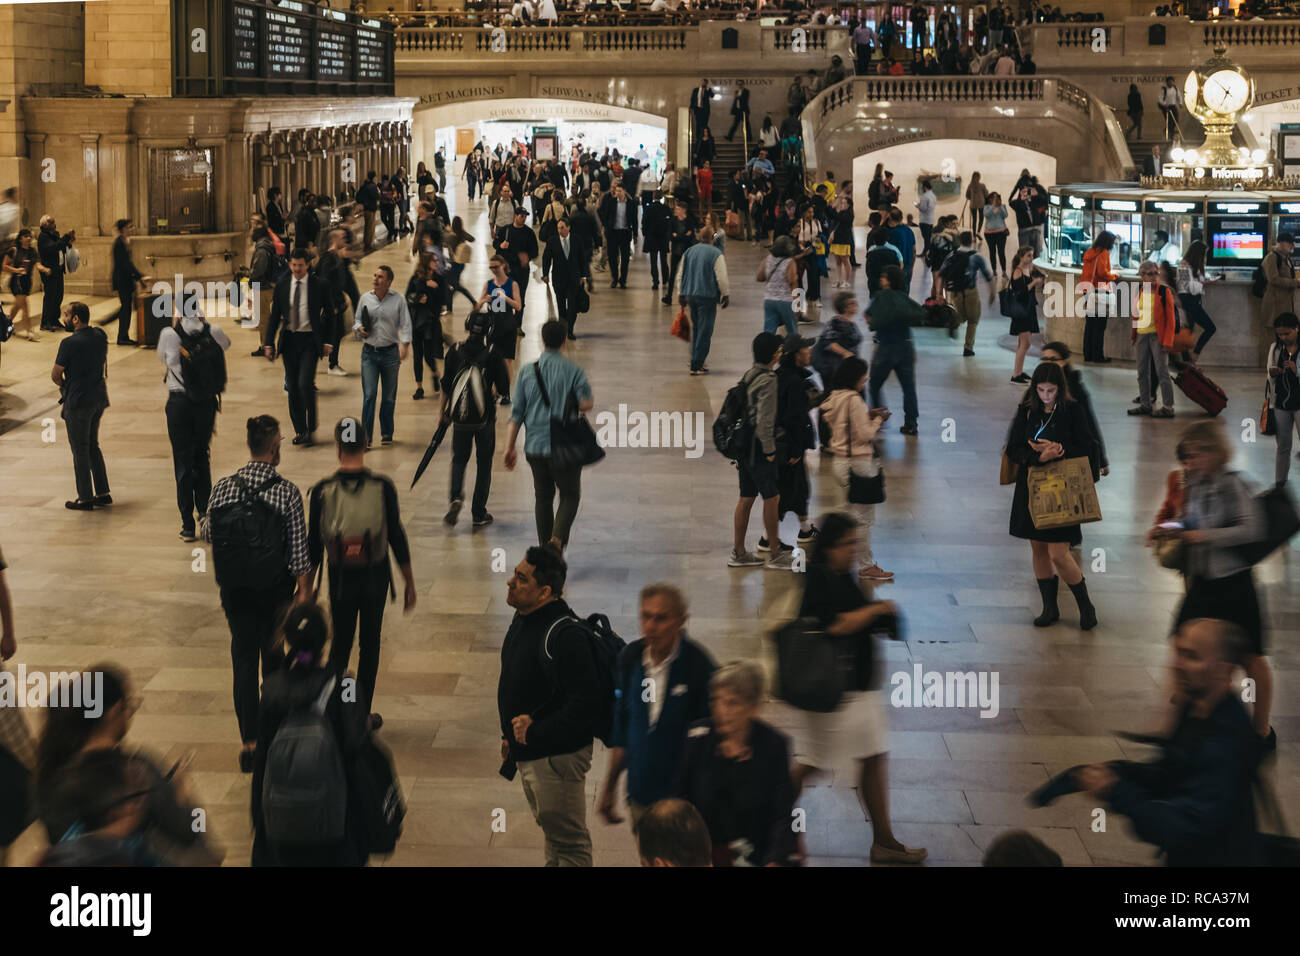 New York, USA - June 1, 2018: People walking inside Grand Central Terminal, a world-famous landmark and transportation hub in Midtown Manhattan, New Y Stock Photo